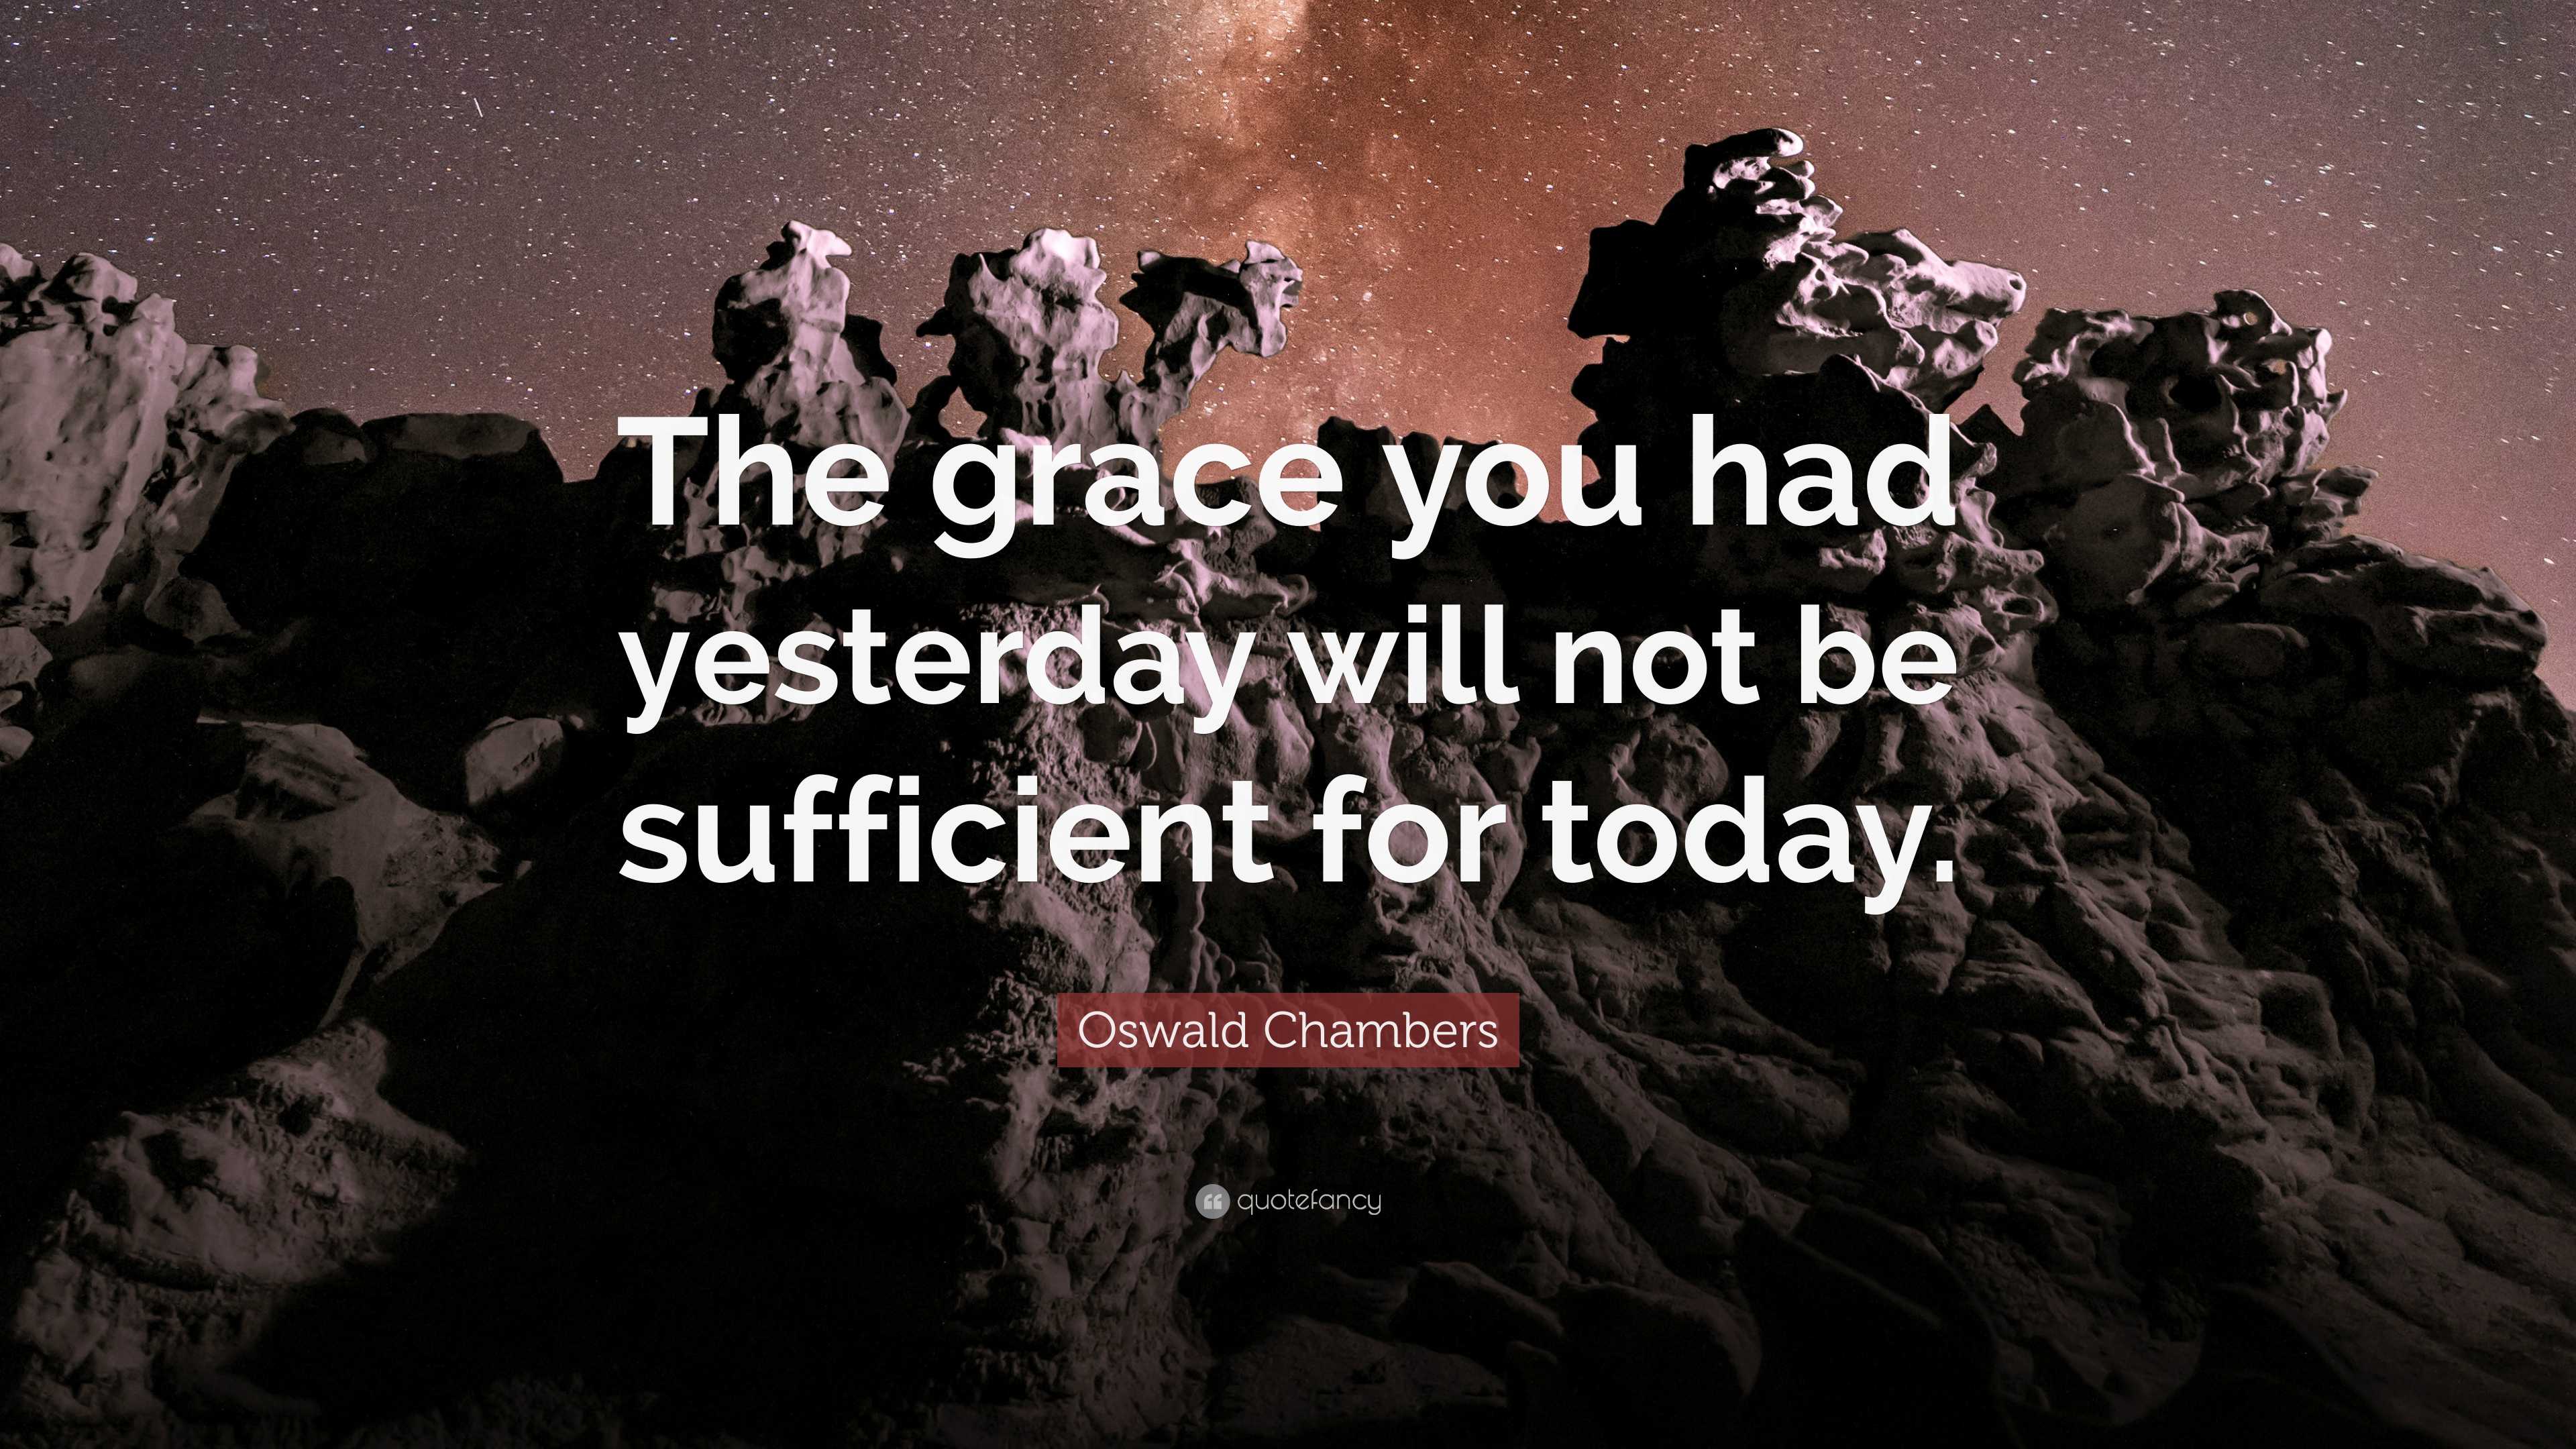 Your Grace is Sufficient: Quo vadis?